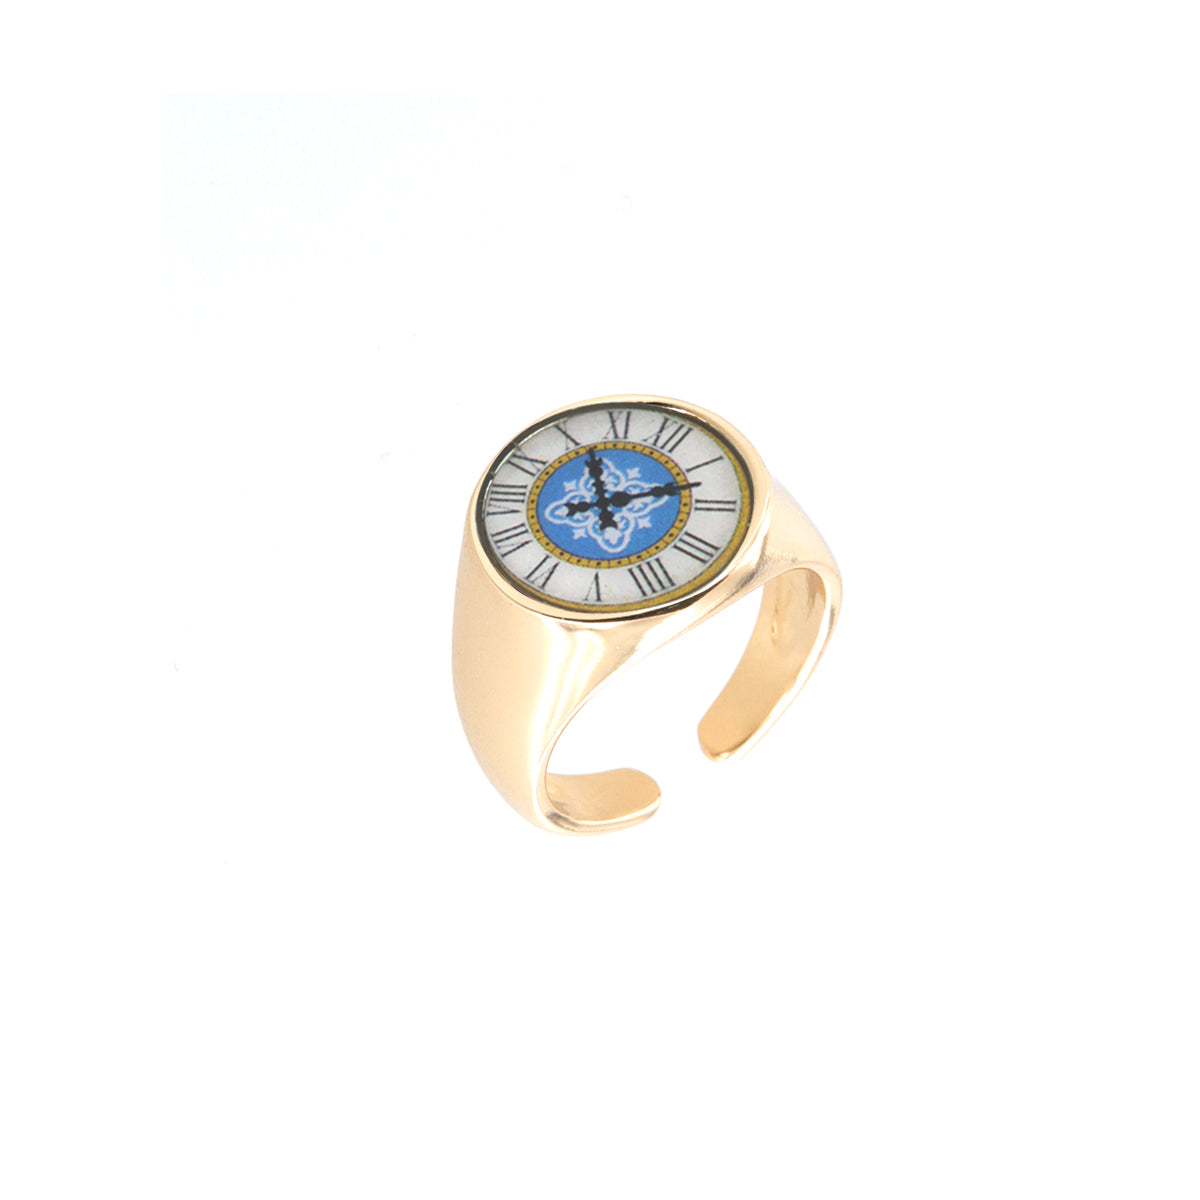 Sigillo metal ring, with central Capri watch